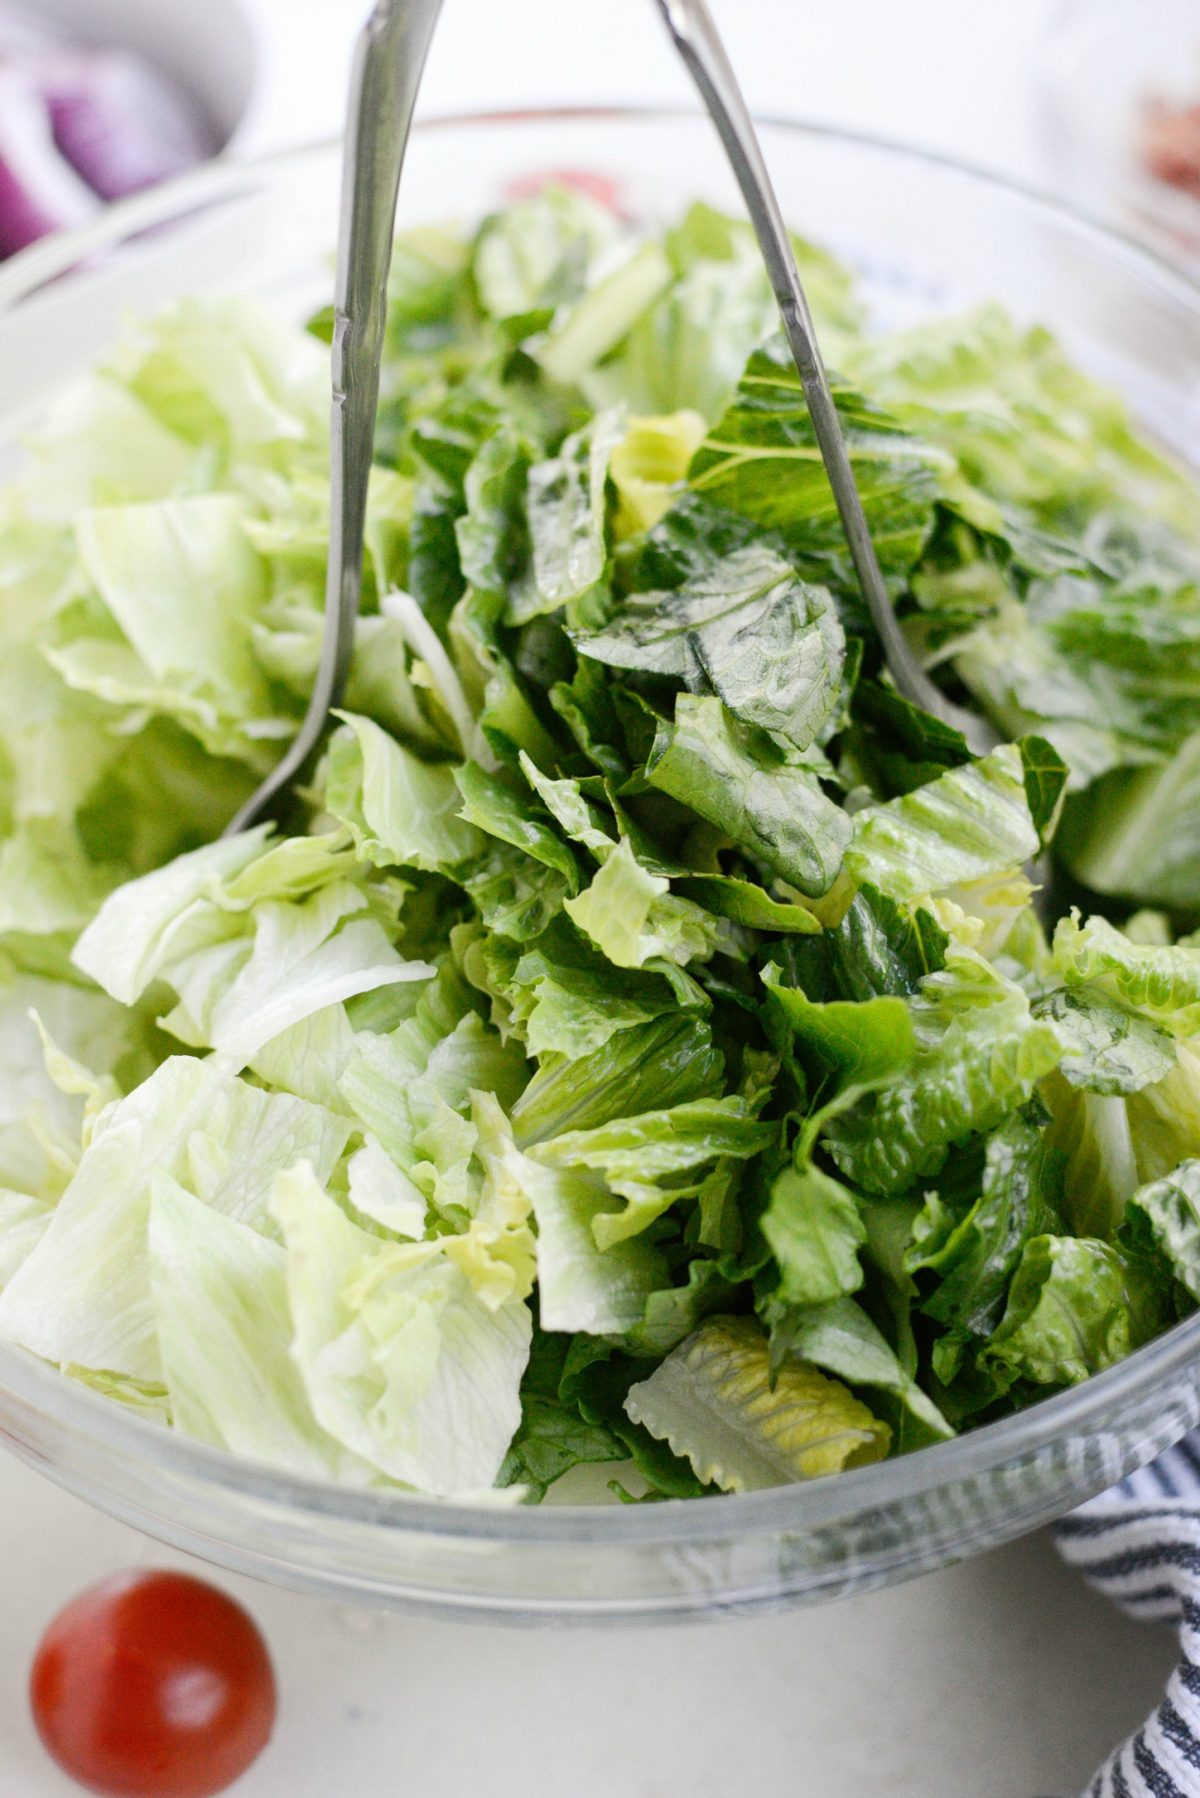 toss salad greens with dressing